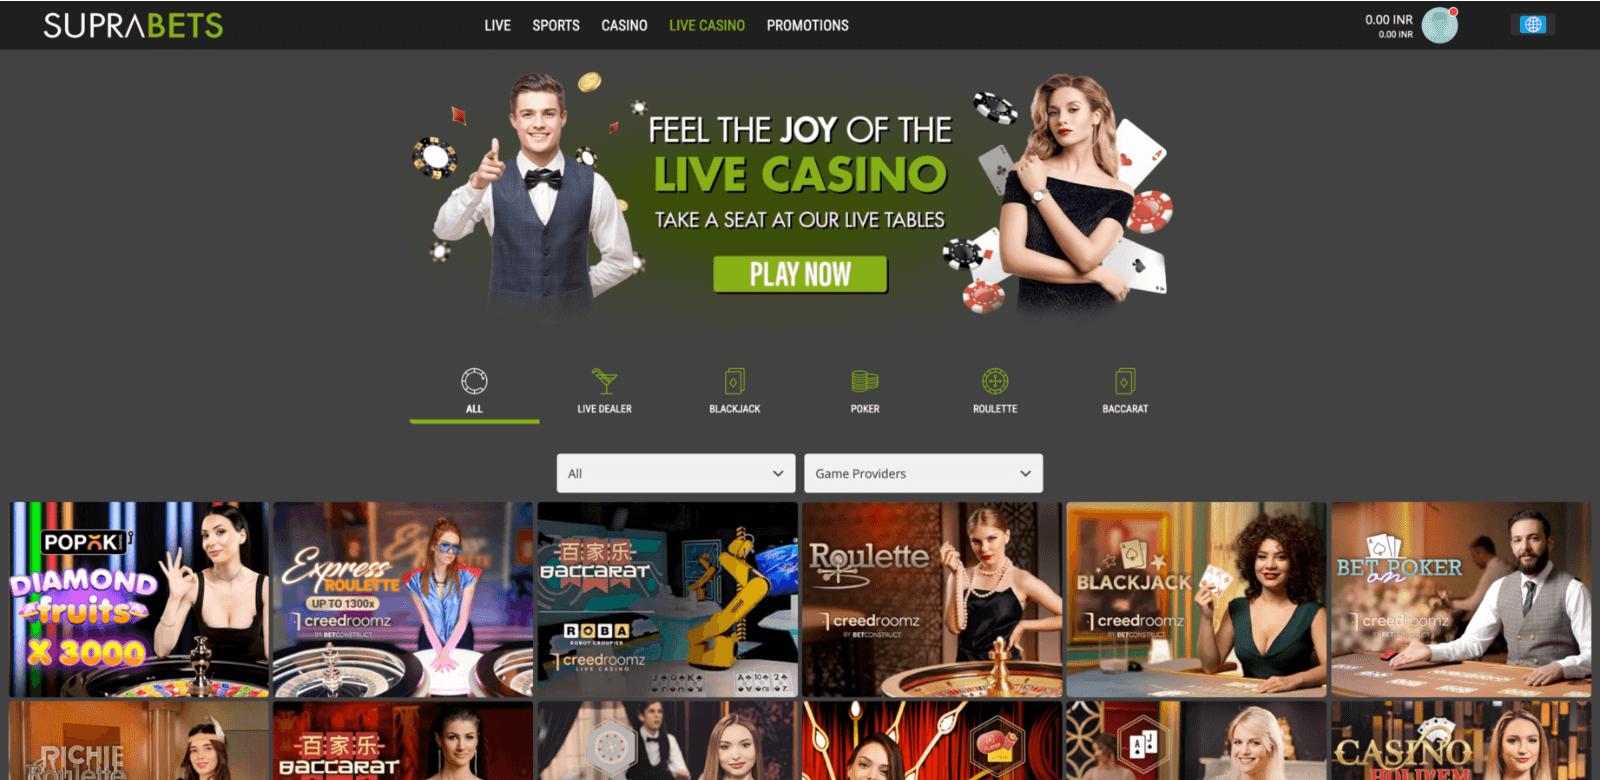 Live casino section at Suprabets website